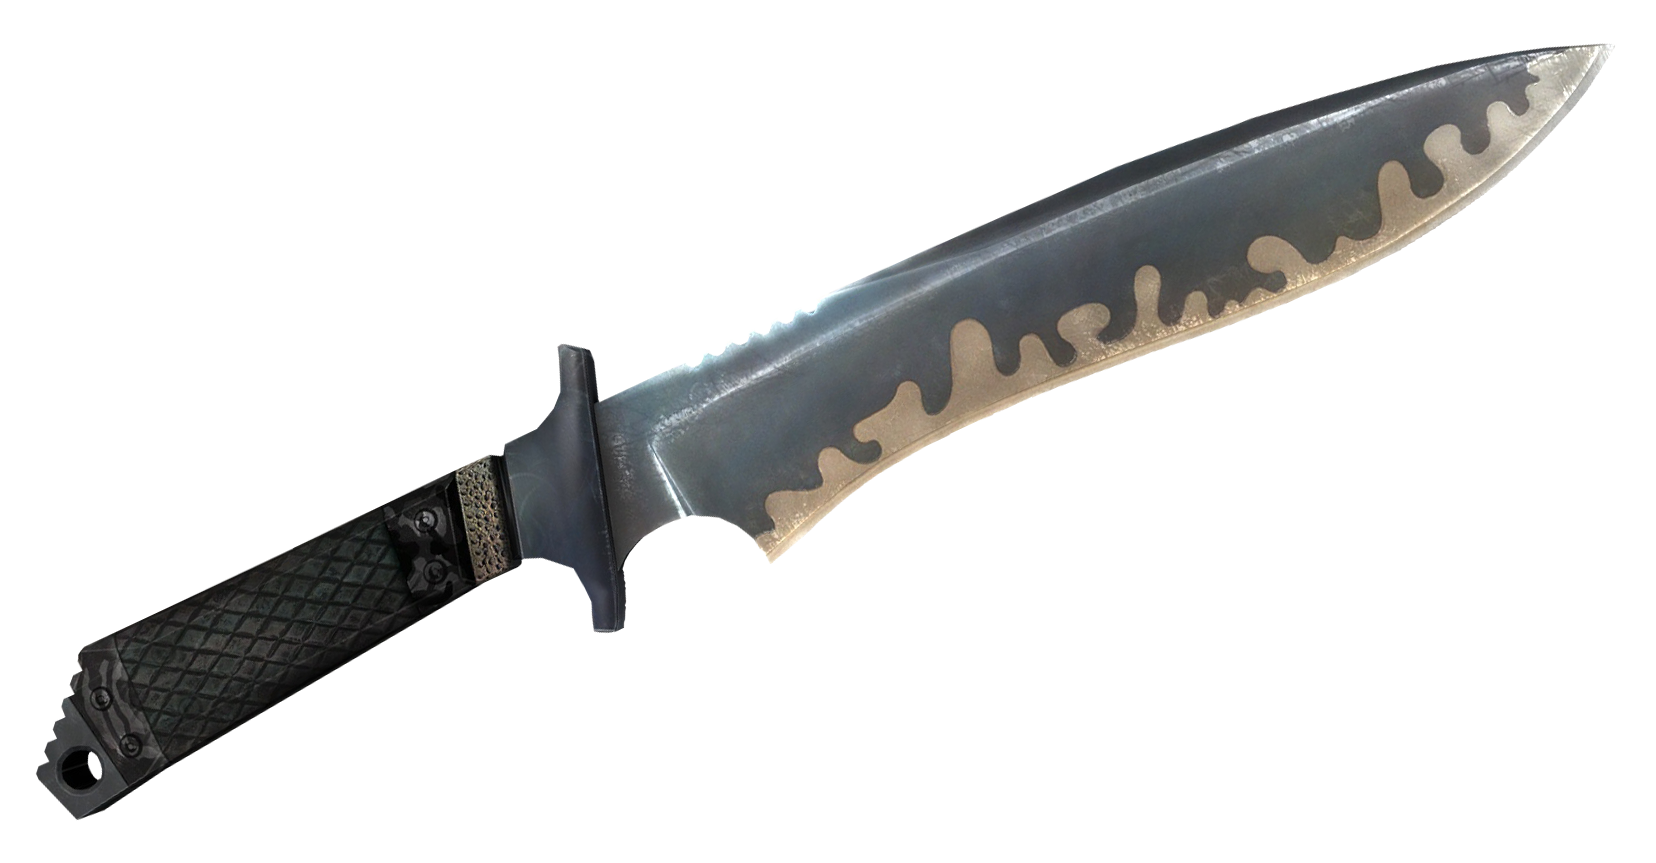 Classic Knife ★ Large Rendering